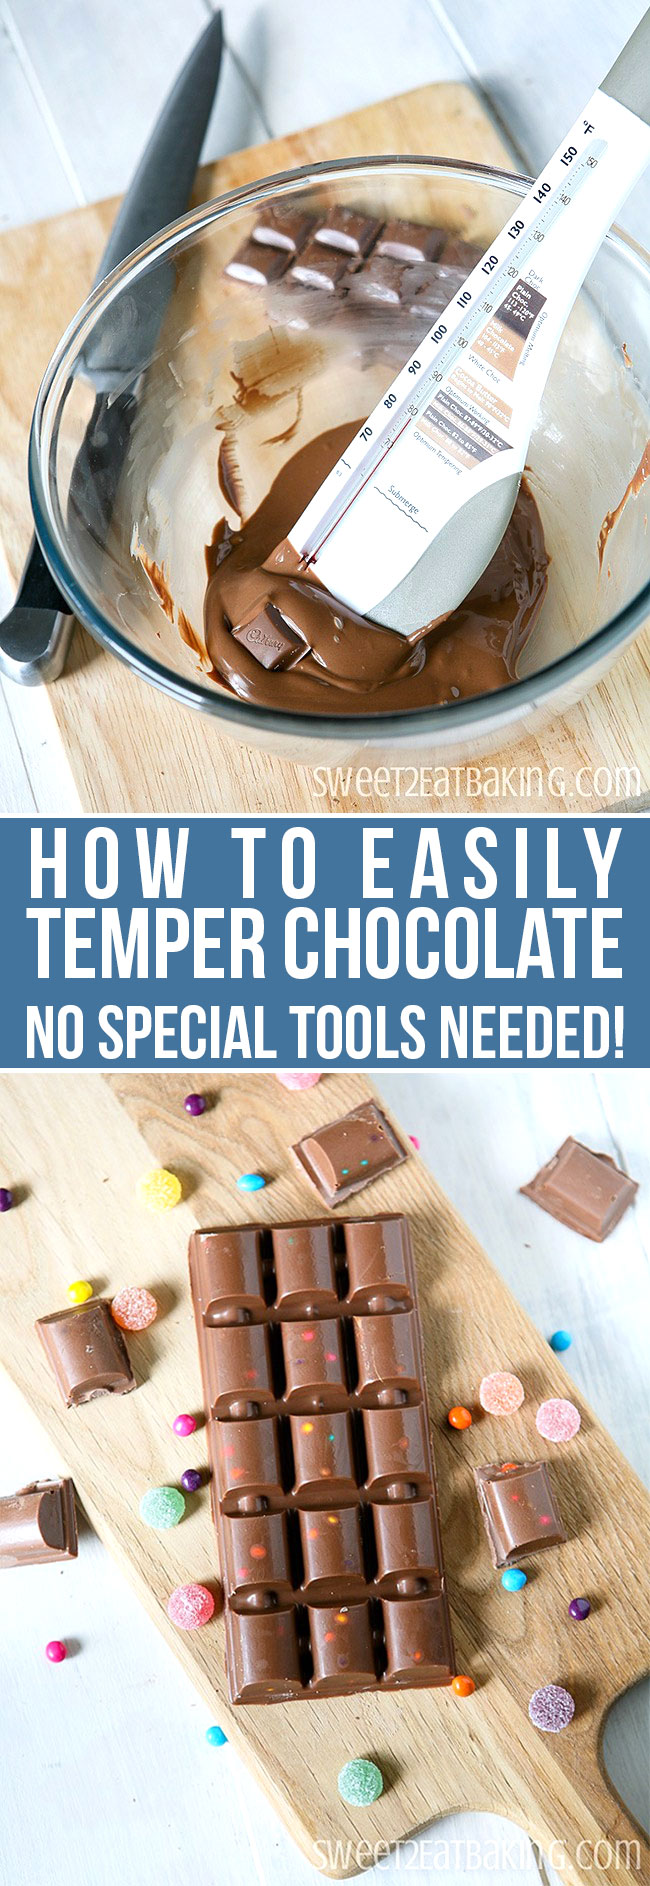 How to Temper Chocolate by Sweet2EatBaking.com | Learn how to temper chocolate quickly and easily with no special tools and equipment